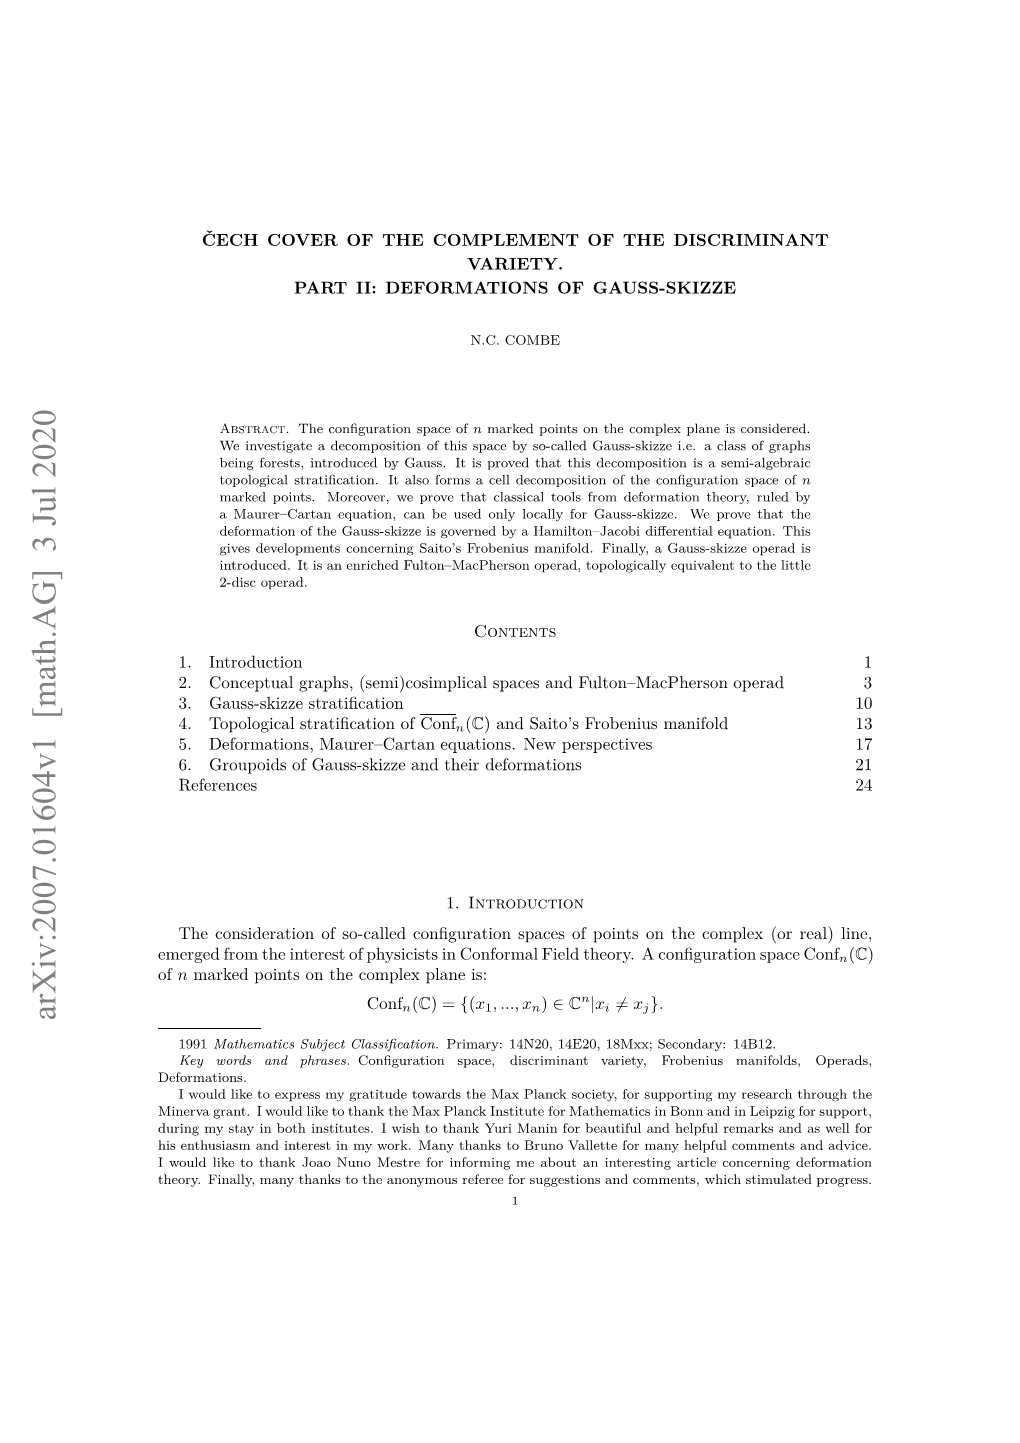 Cech Cover of the Complement of the Discriminant Variety. Part II